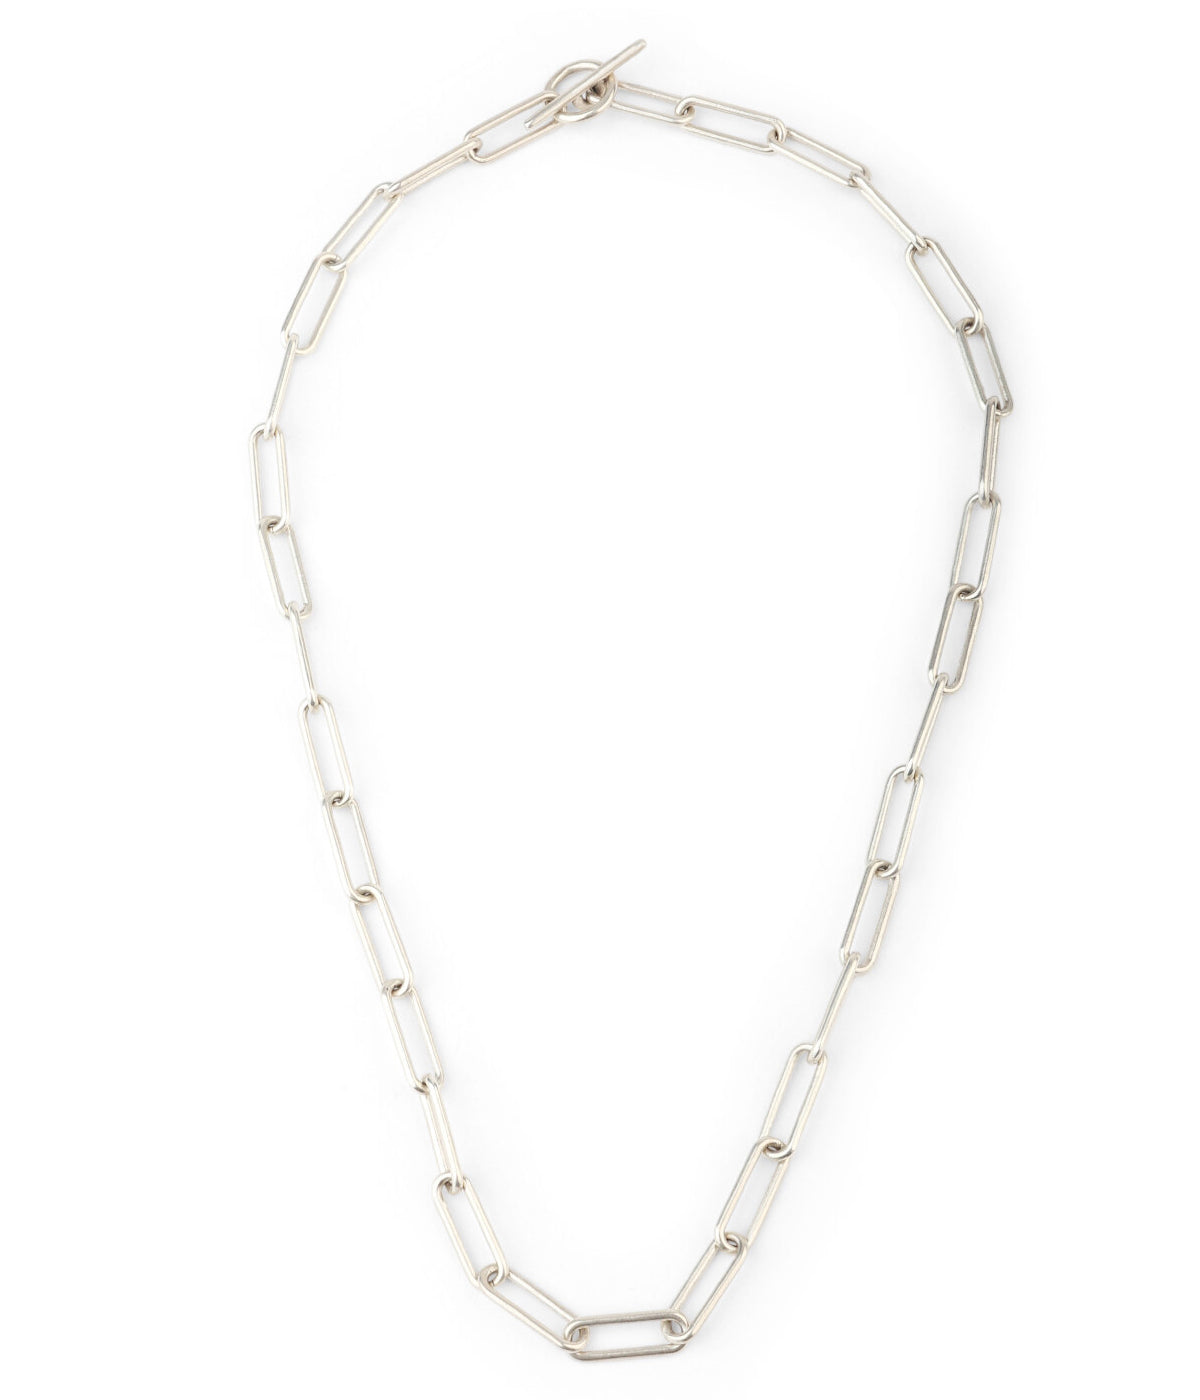 The Ovalado Necklace in Silver